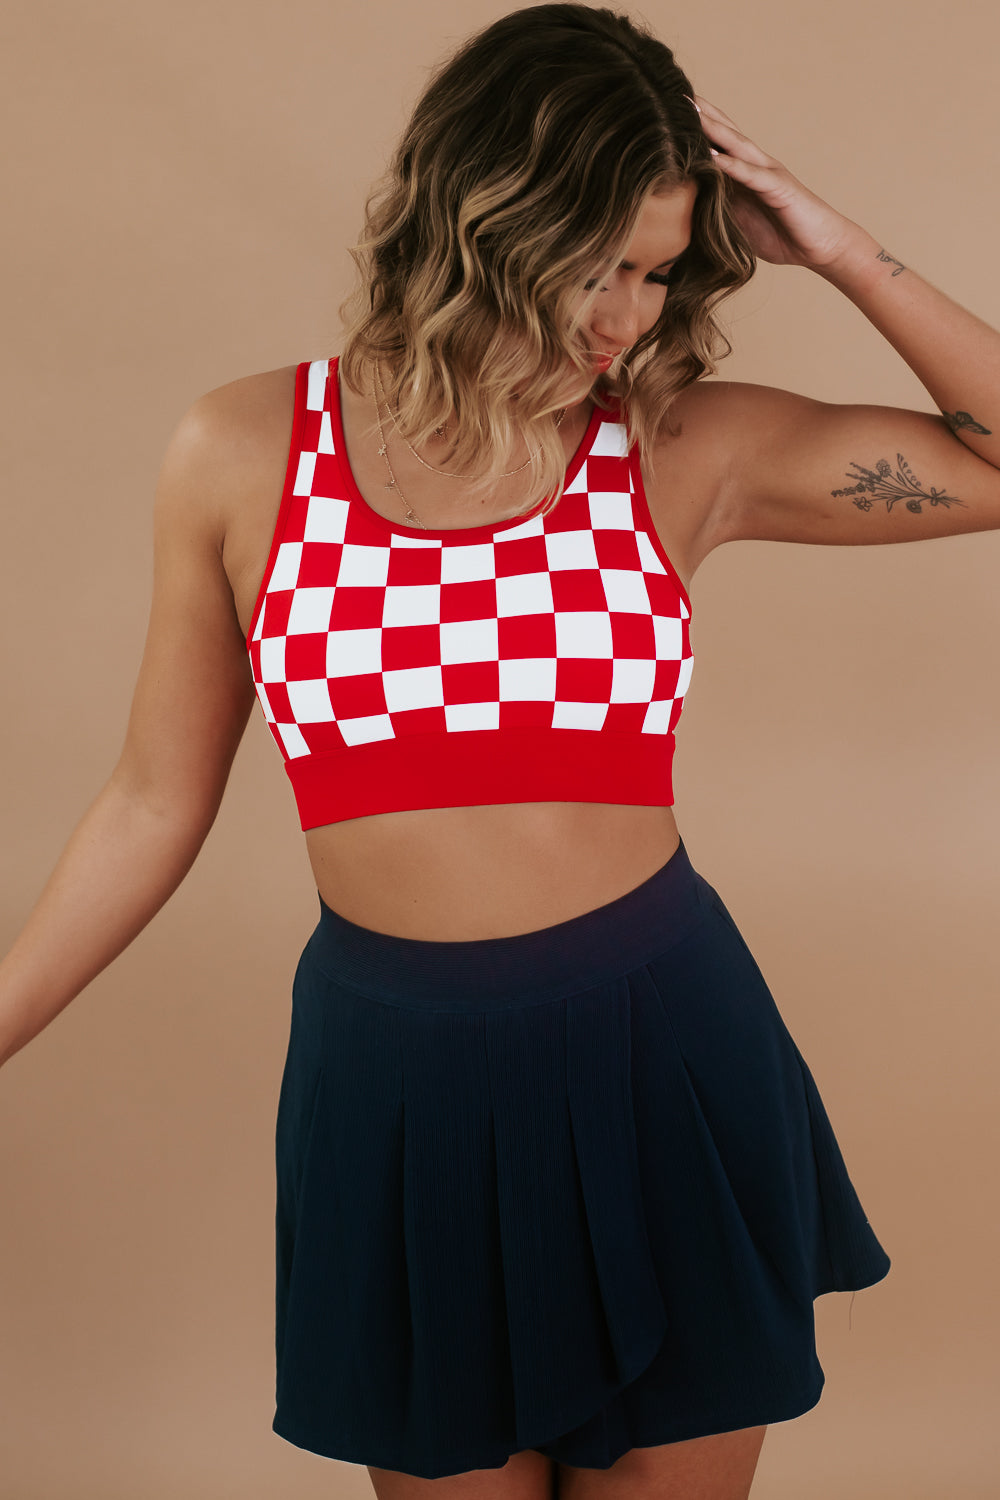 Feeling Fit Thick Strap Checkered Sports Bra, Red